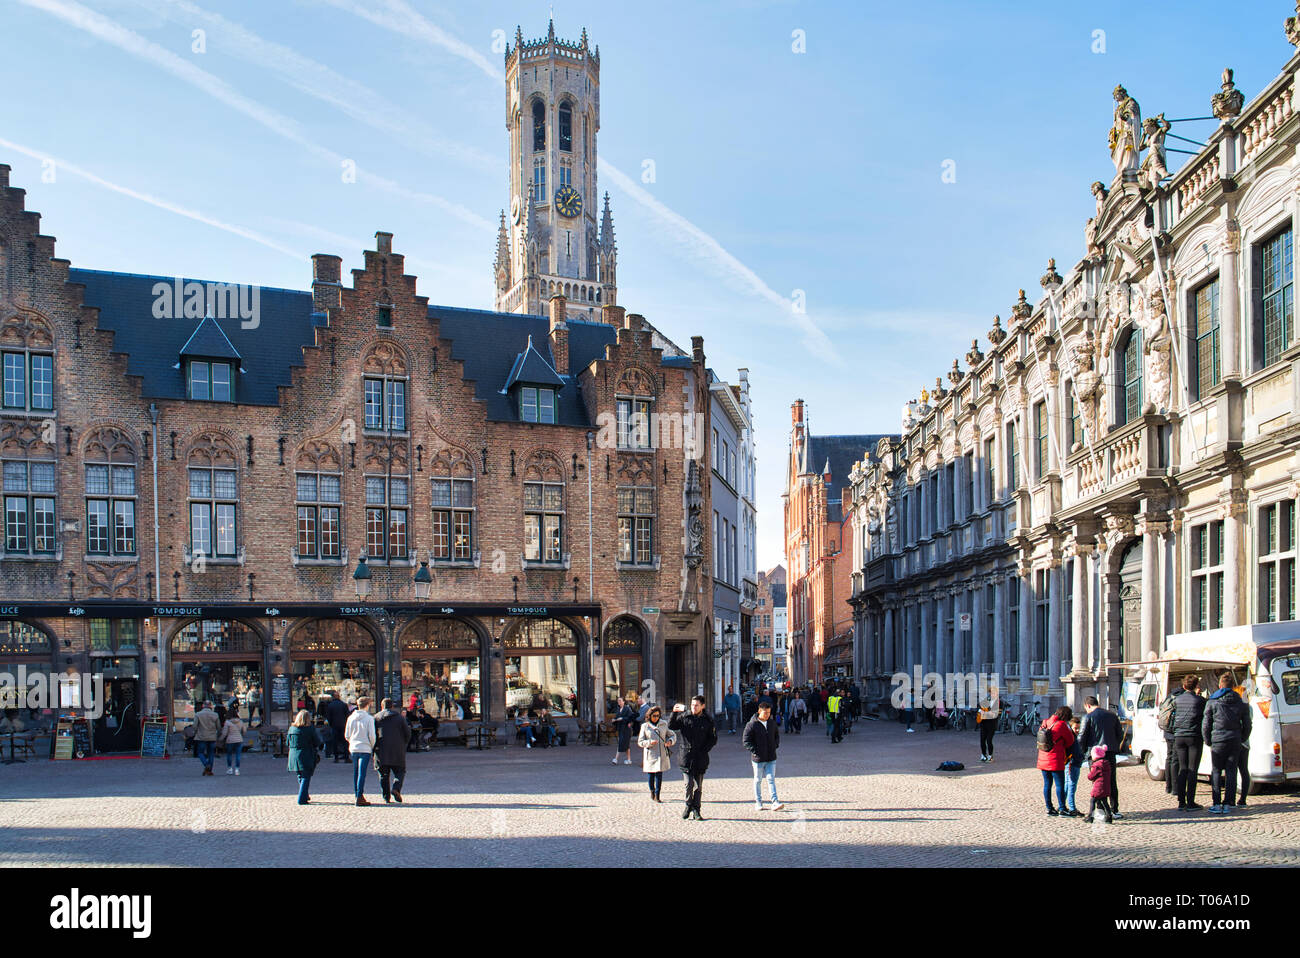 BRUGES, BELGIUM - FEBRUARY 17, 2019: The main city square is Burg. View ...